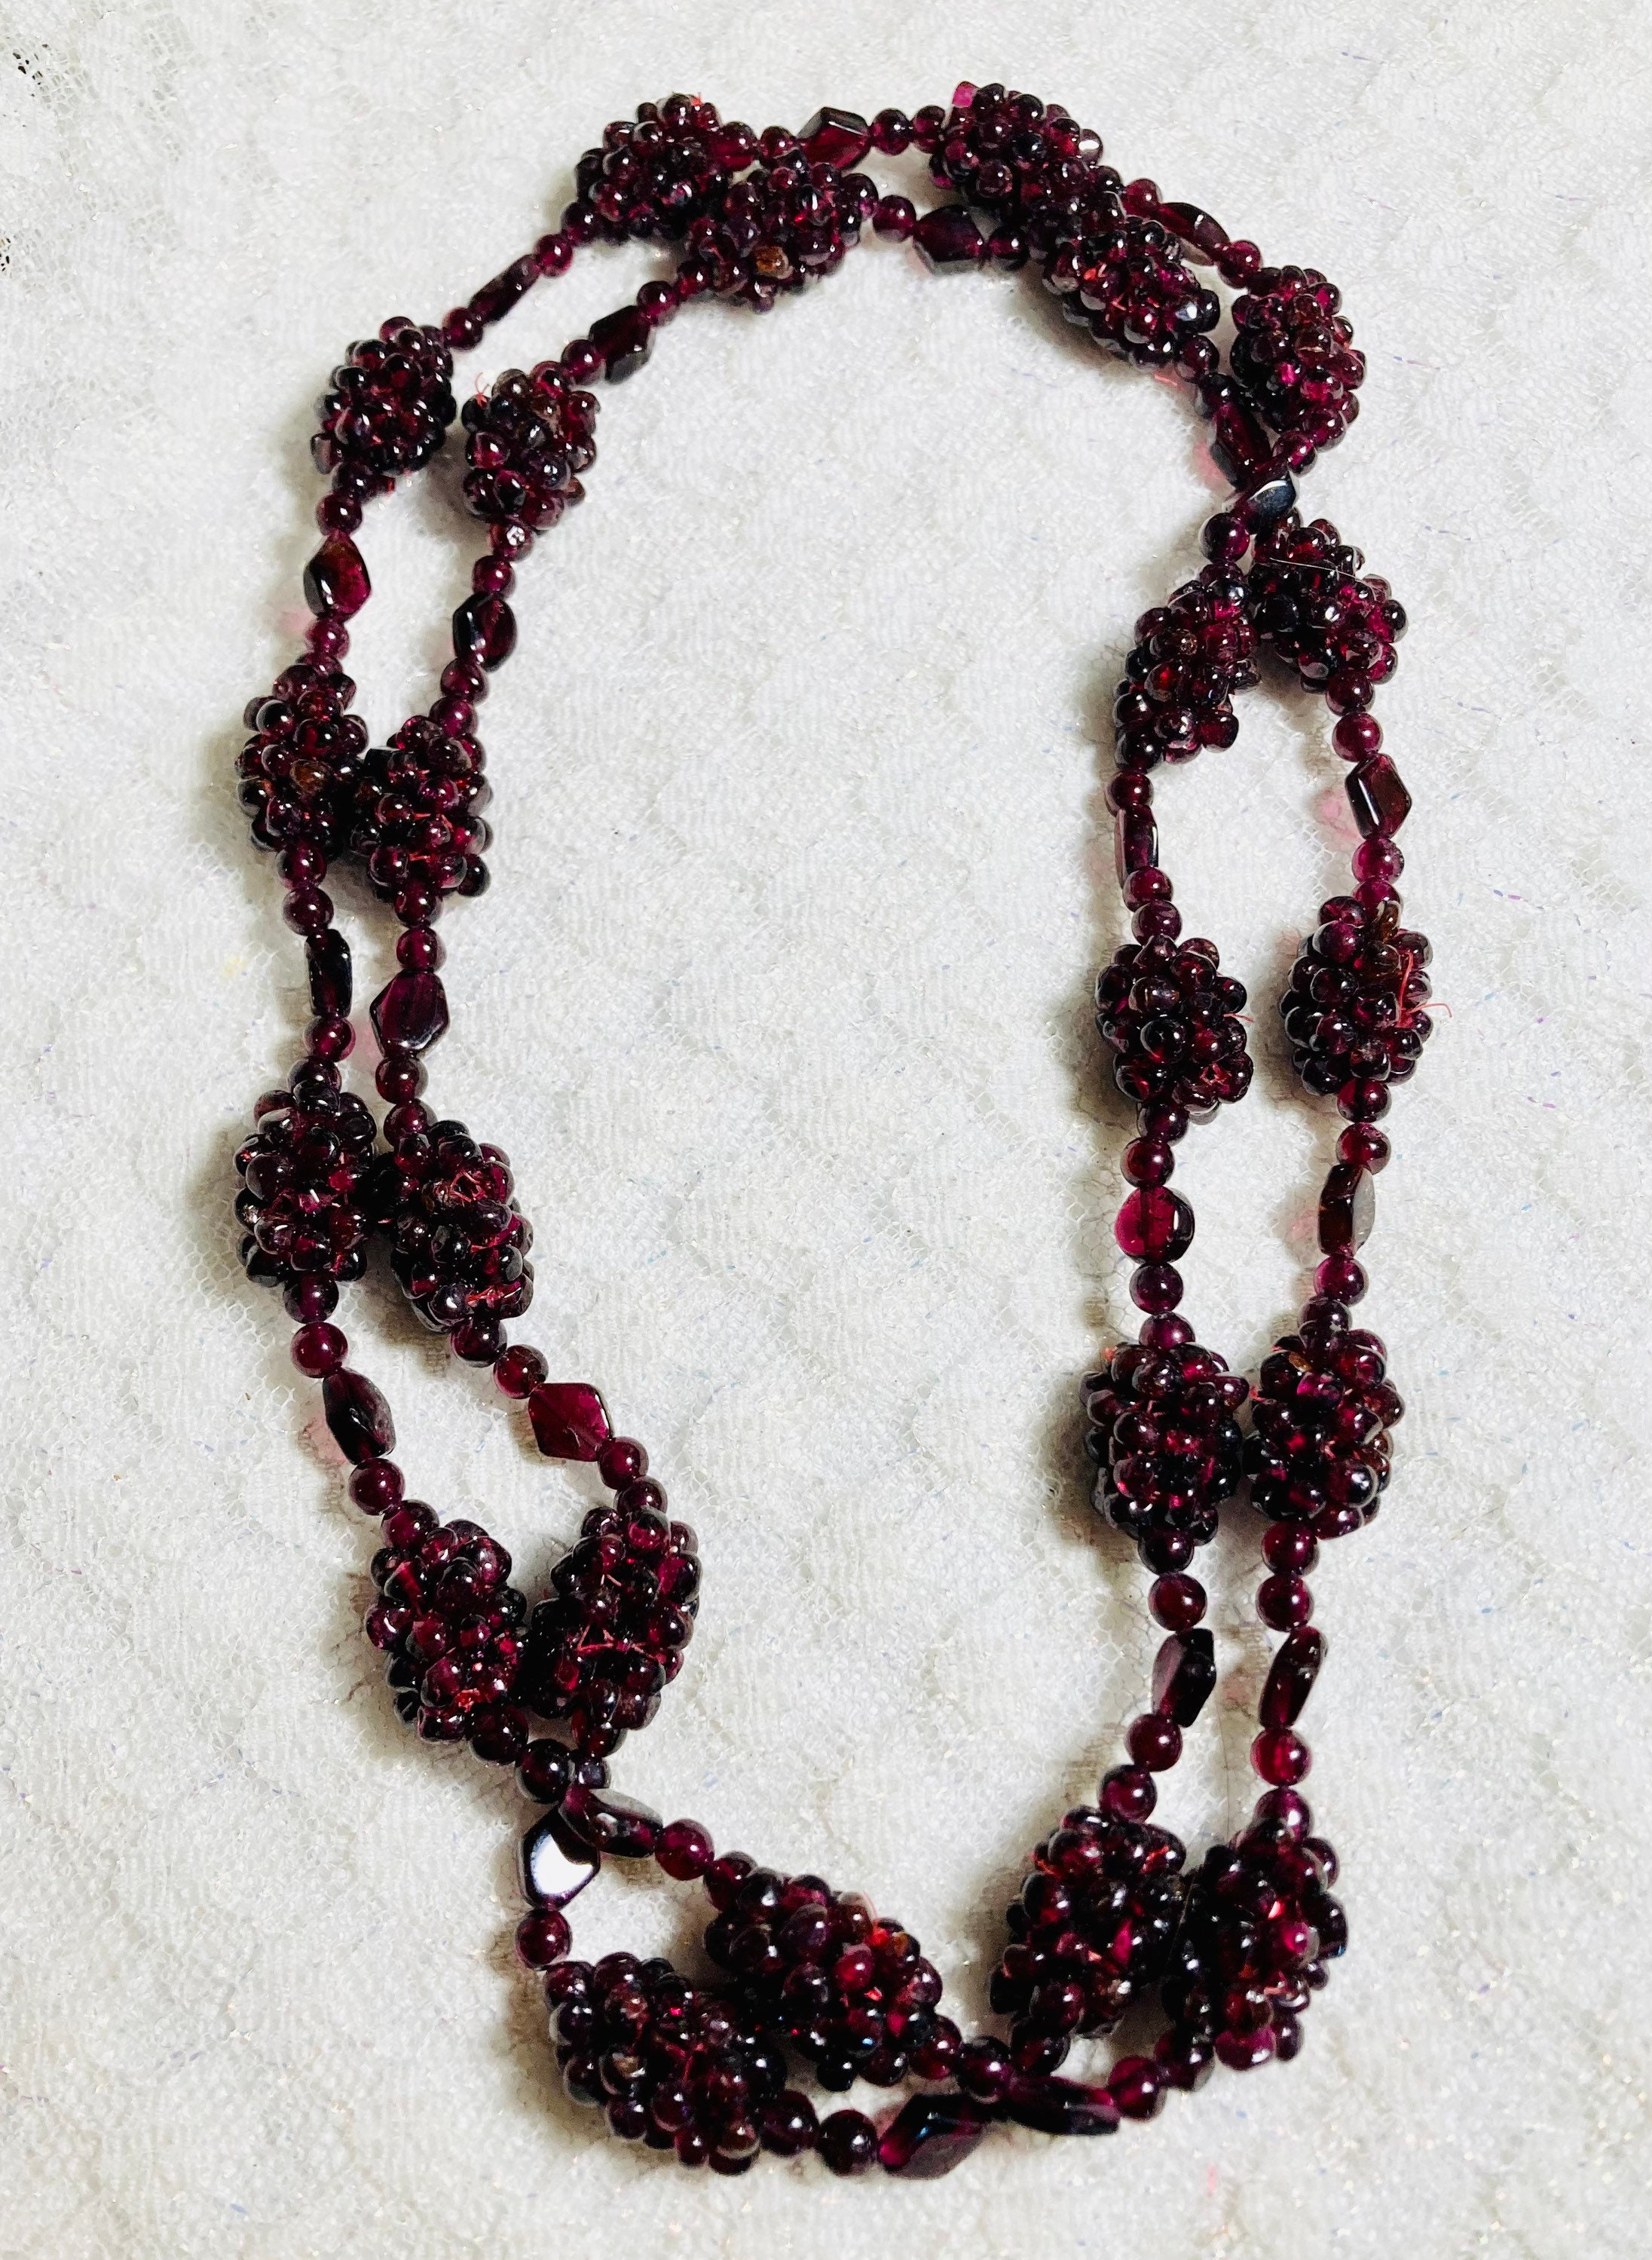 Vintage 1980s Woven Bohemian Garnet Bead Rope Necklace with